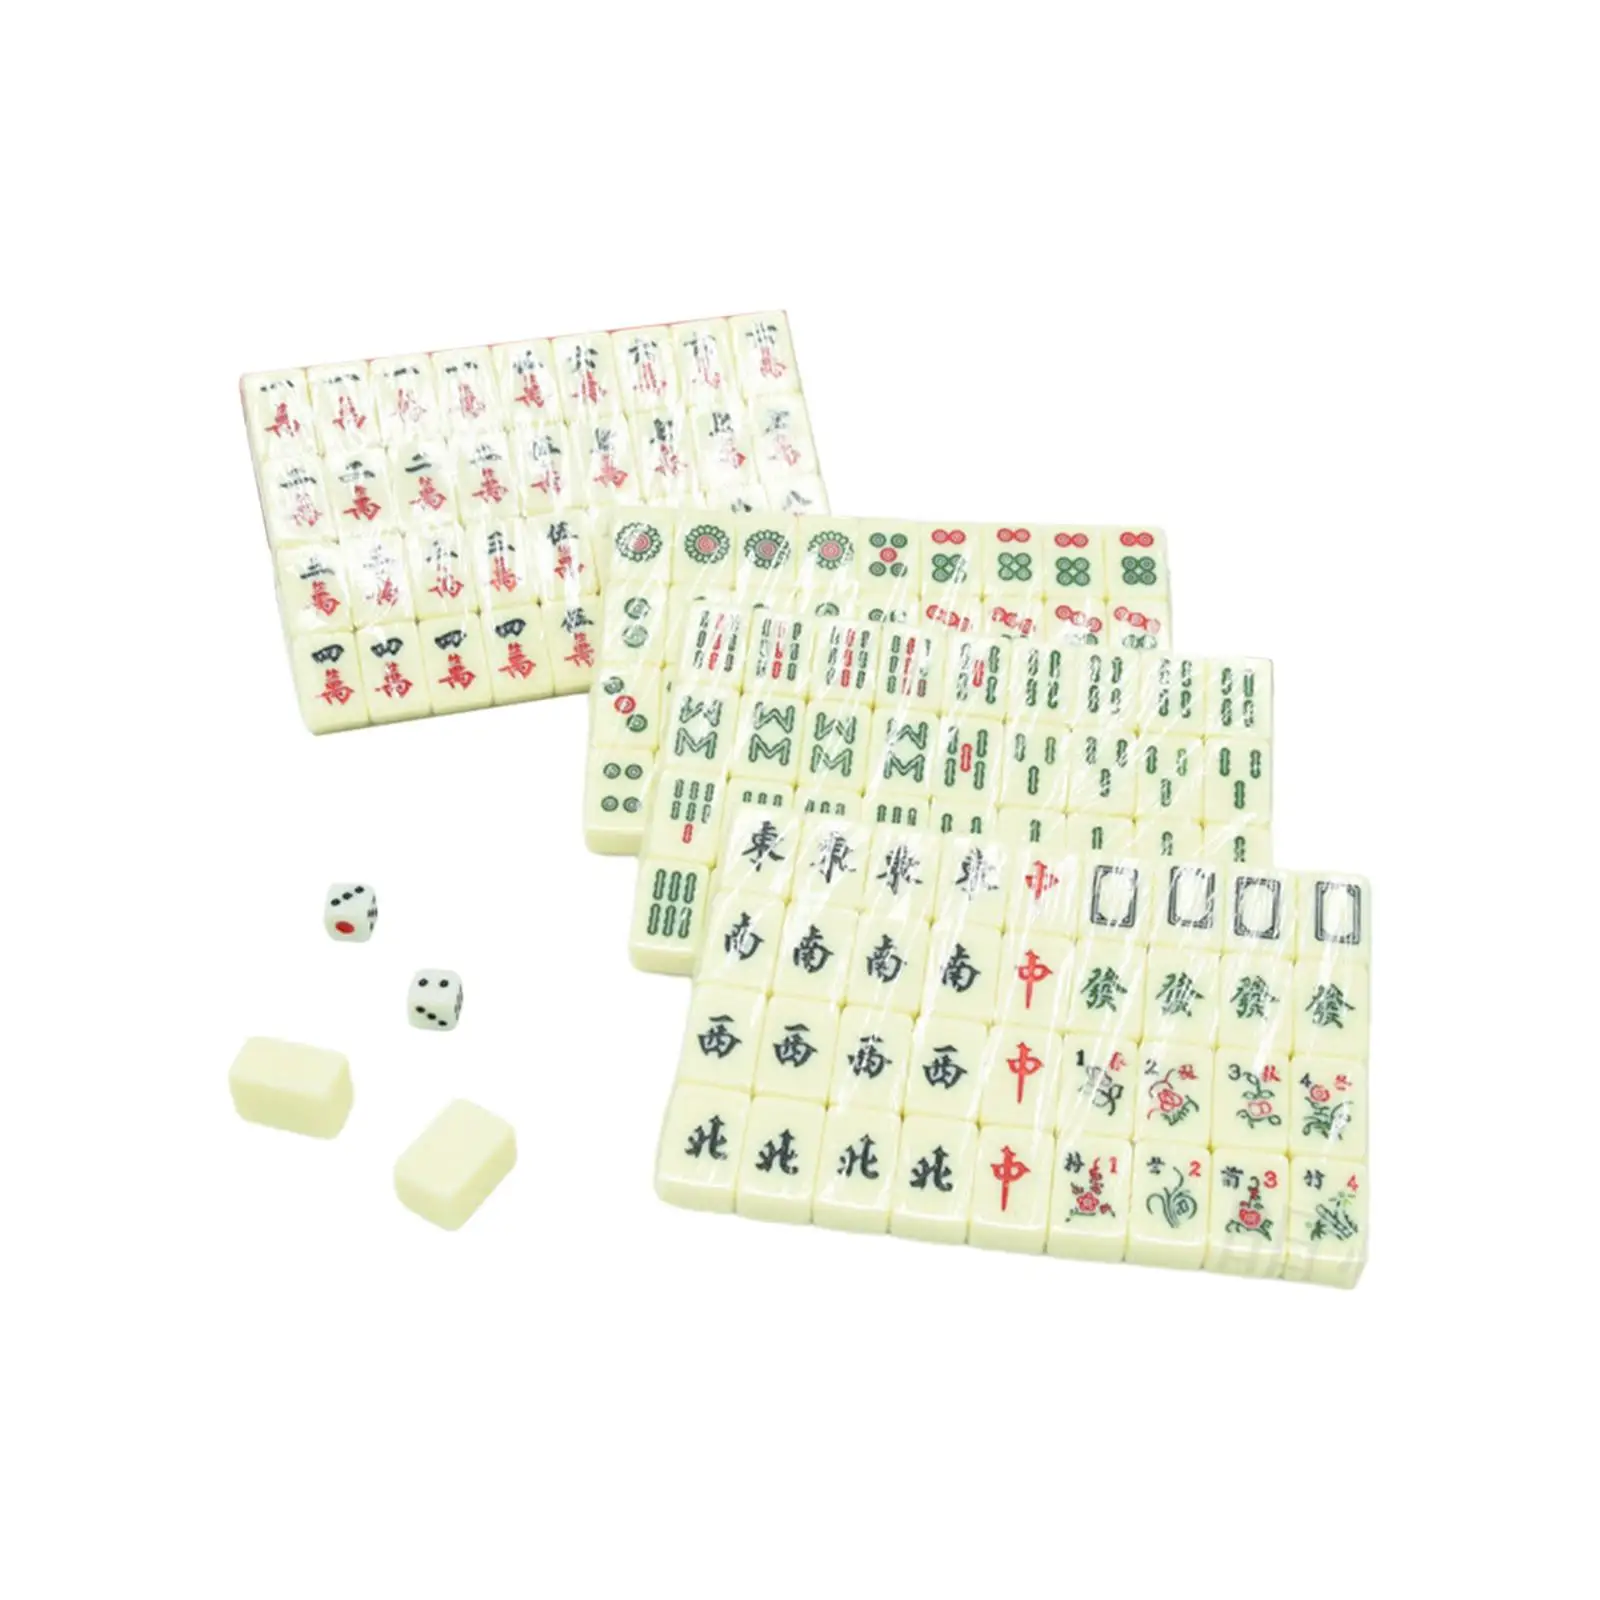 Chinese Mini Mahjong Small Tiles Lightweight Mahjong Gifts Mahjong Game Set Travel Mahjong Set for Family Leisure Party Picnic